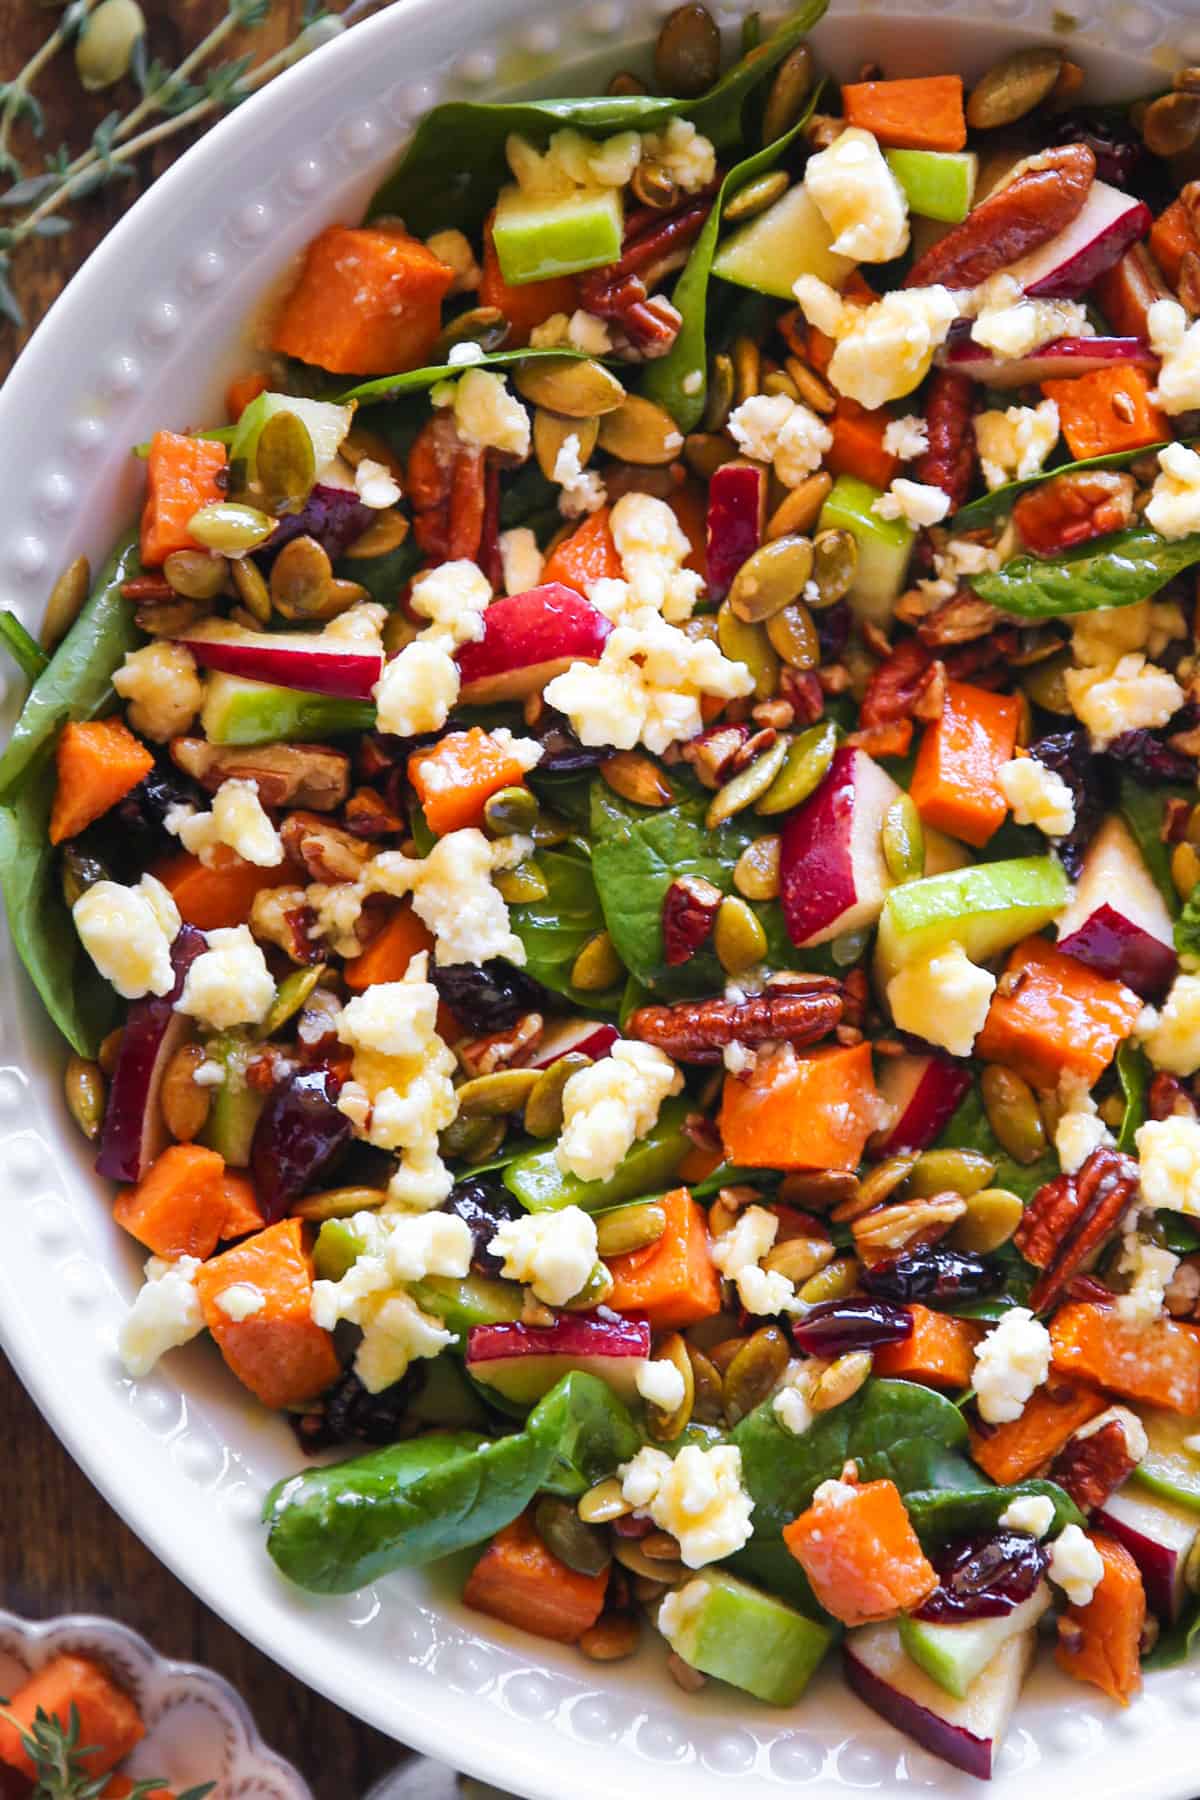 Roasted Sweet Potato Salad with spinach, apples, dried cranberries, pecans, pumpkin seeds, and feta cheese - in a white bowl.